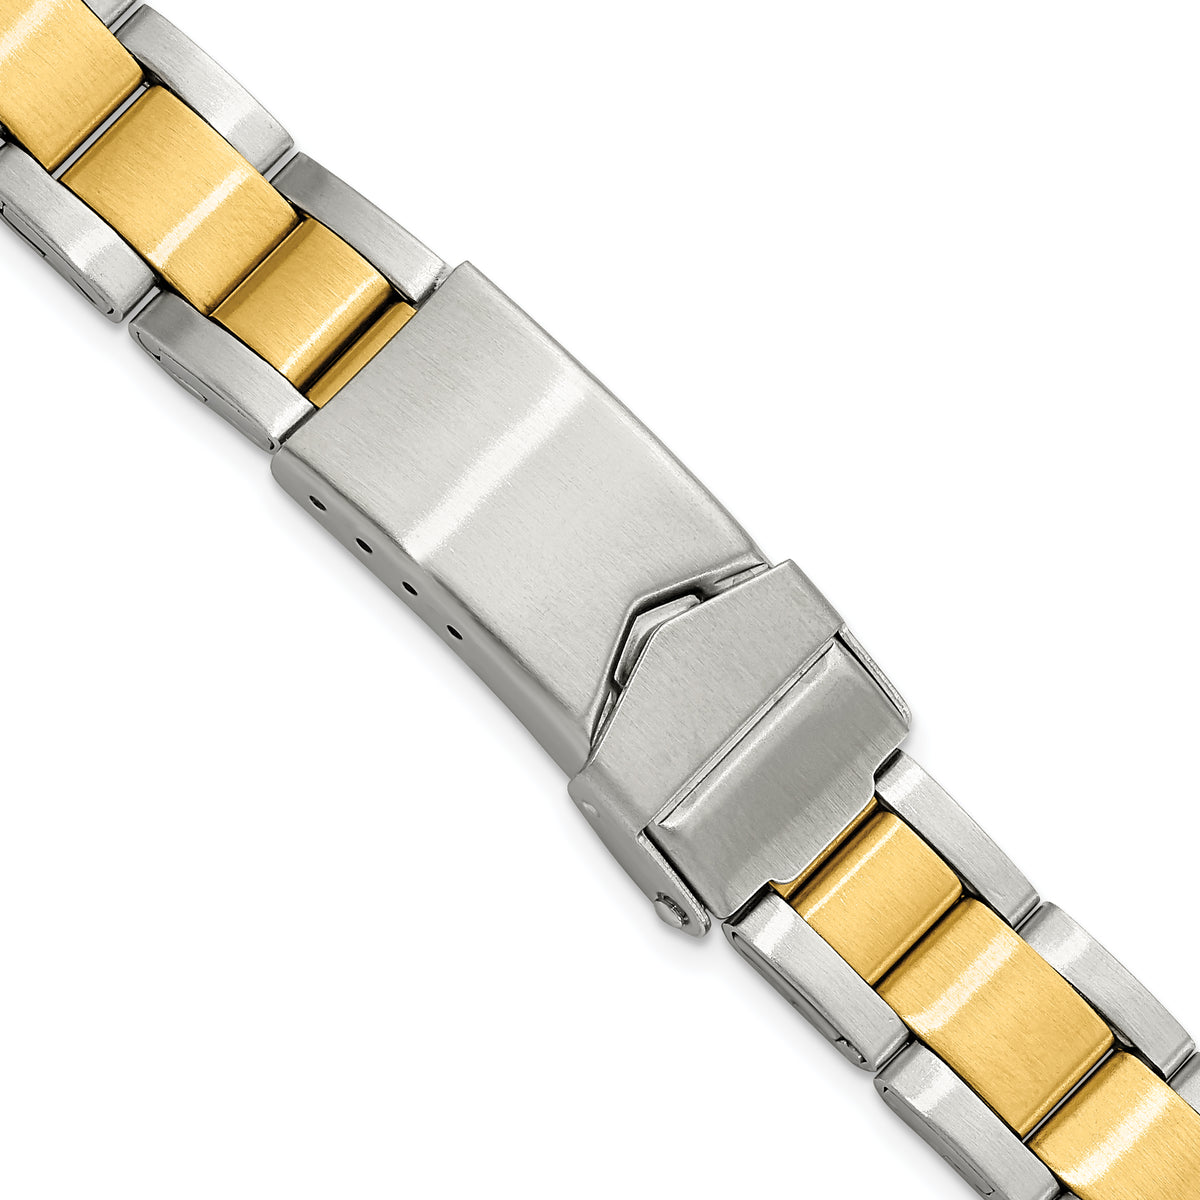 DeBeer 11-14mm Ladies Satin Two-tone Stainless Steel Oyster-Style with Deployment Buckle 6.75 inch Watch Band